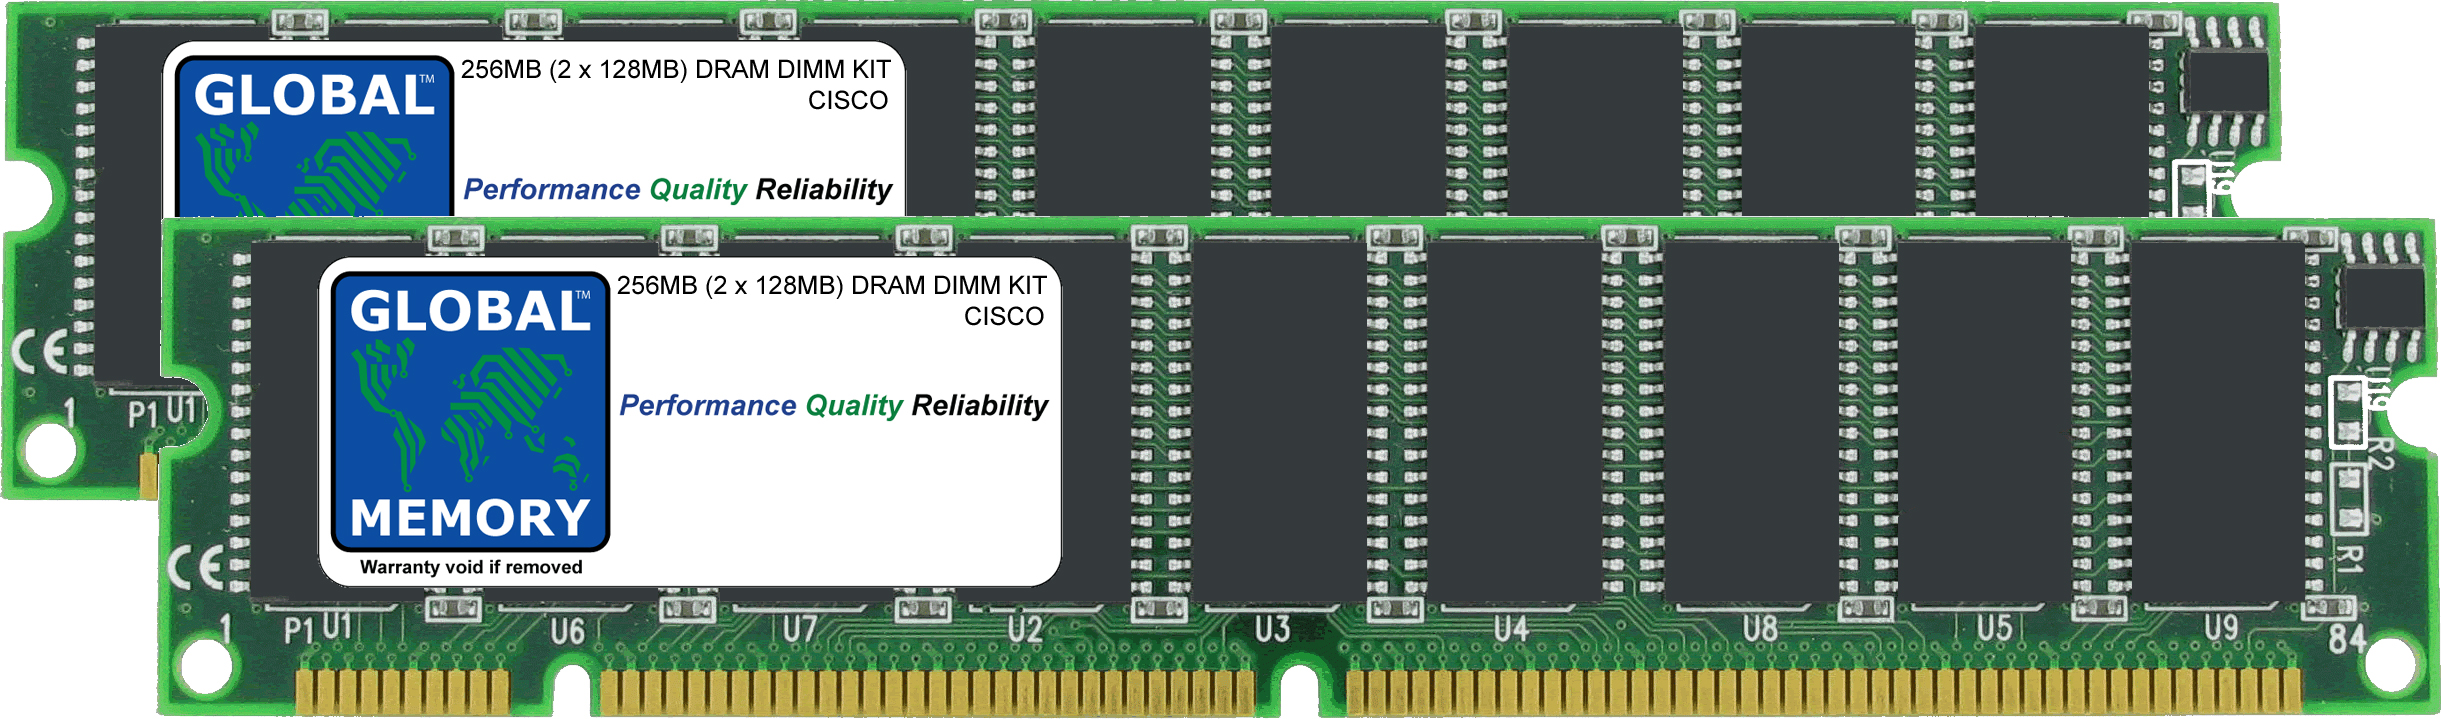 256MB (2 x 128MB) DRAM DIMM MEMORY RAM KIT FOR CISCO 7200 SERIES ROUTERS NPE-175 / 225 / 300 & NSE-1 / 1-7206 VXR (MEM-SD-NPE-256MB) - Click Image to Close